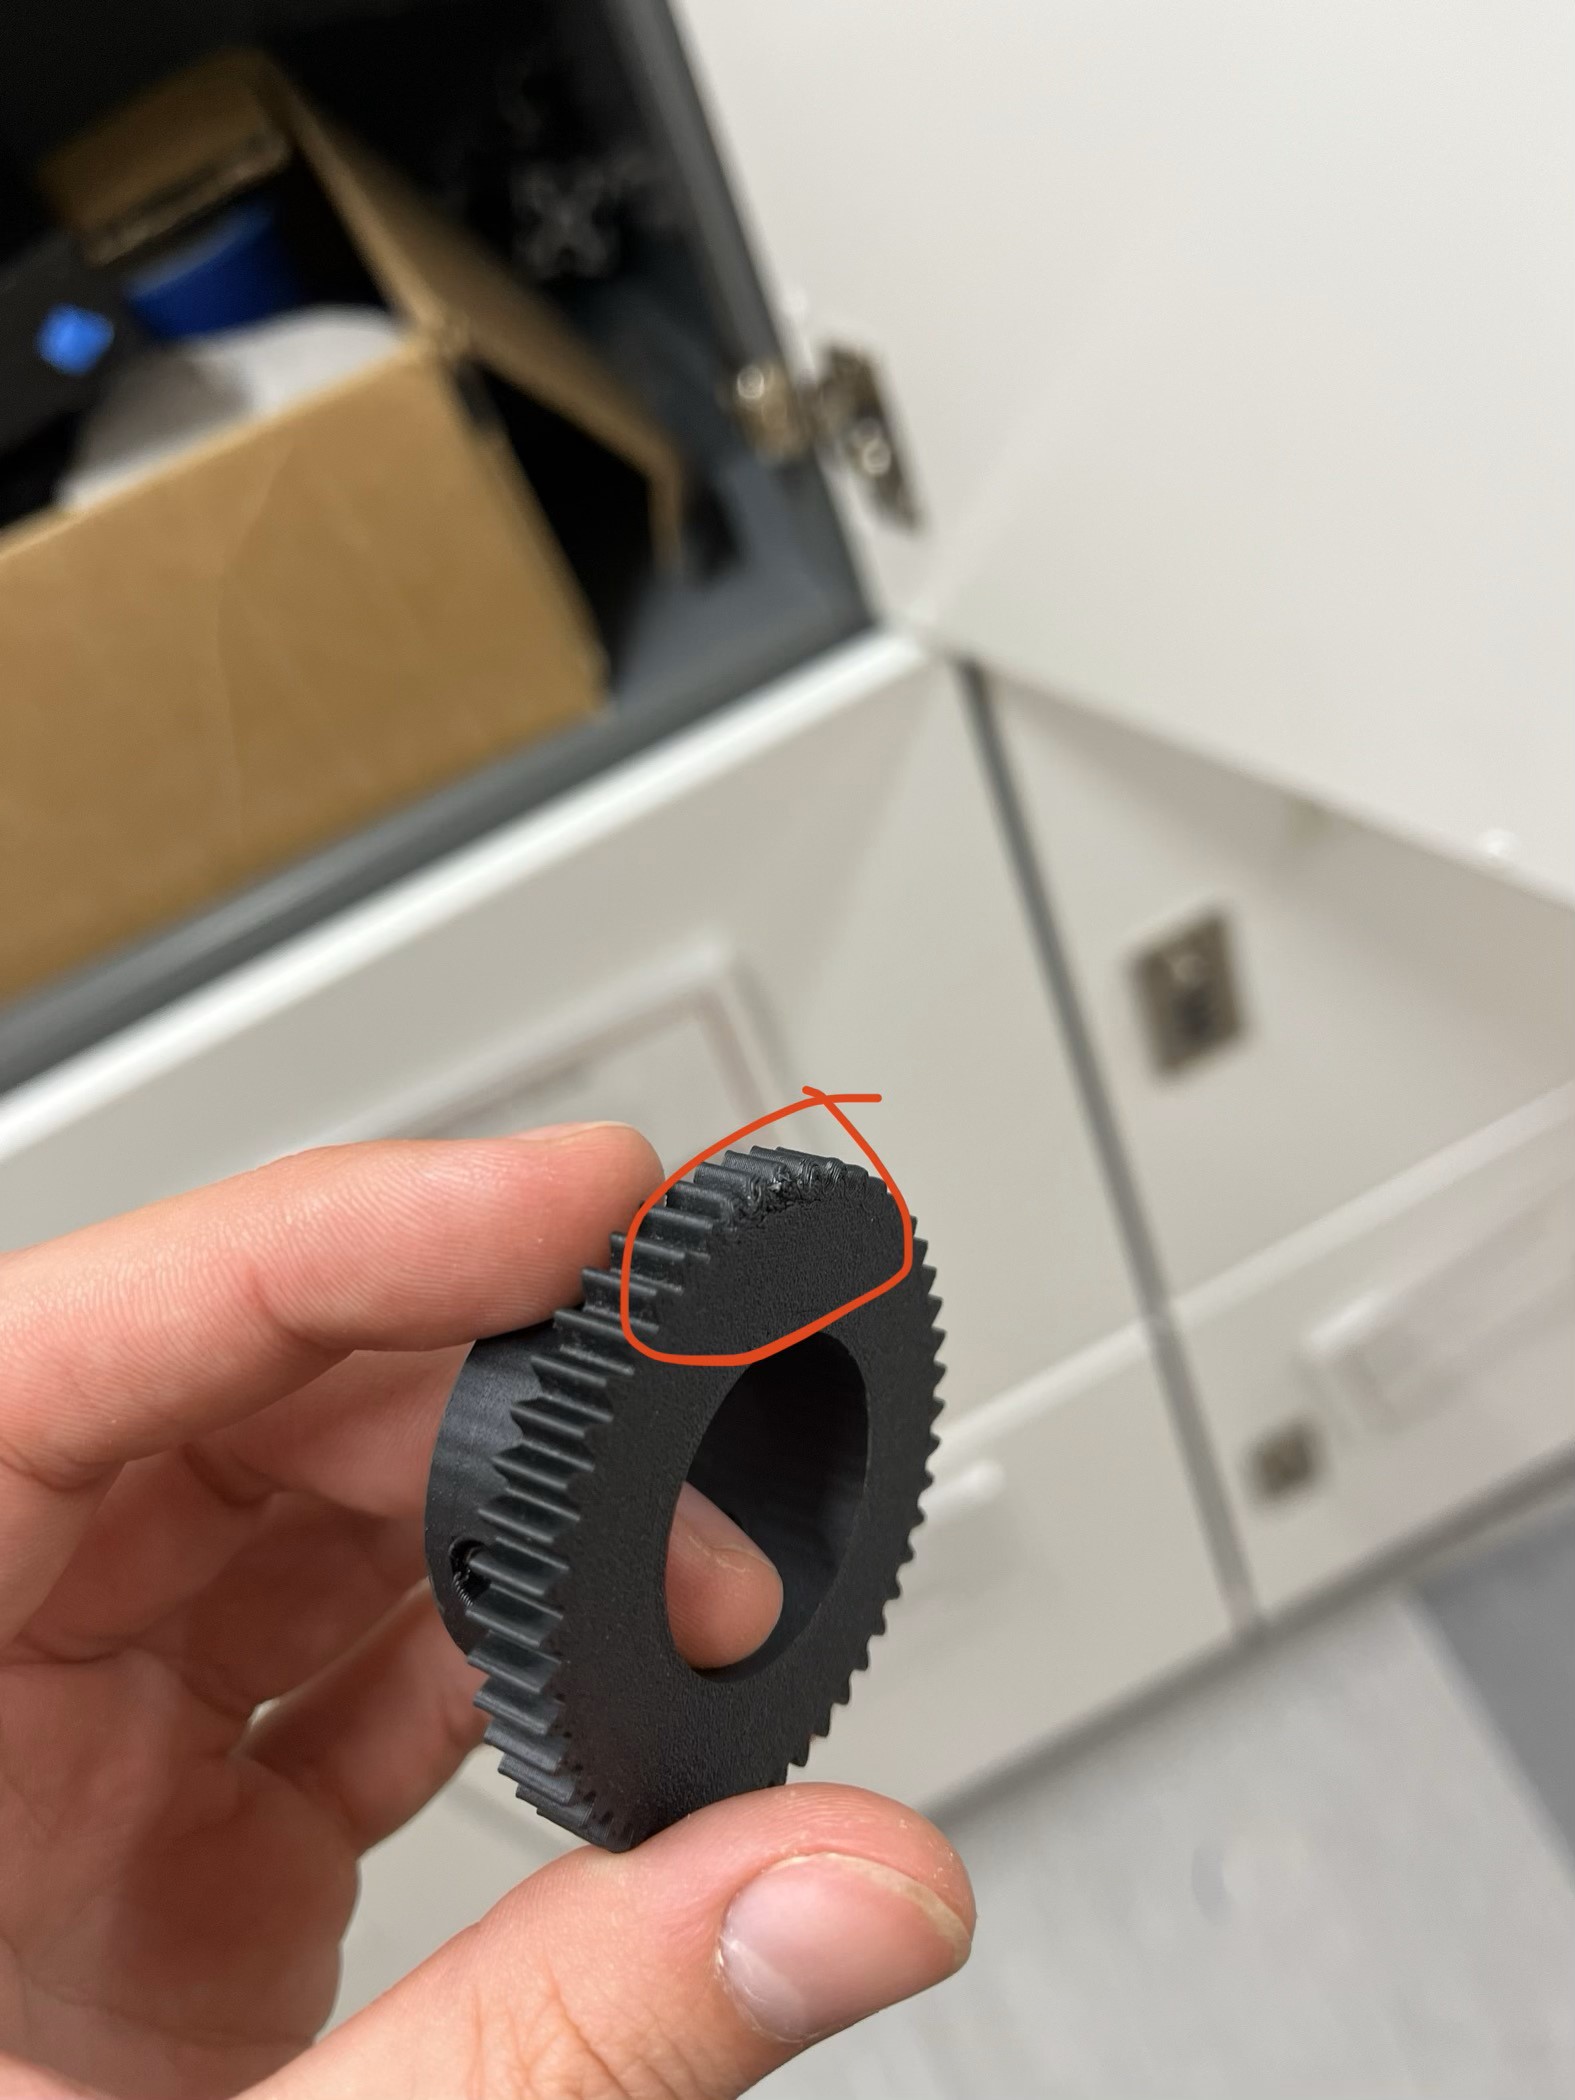 A control knob gear that was damaged after an attempt to insert heated threads into the plastic